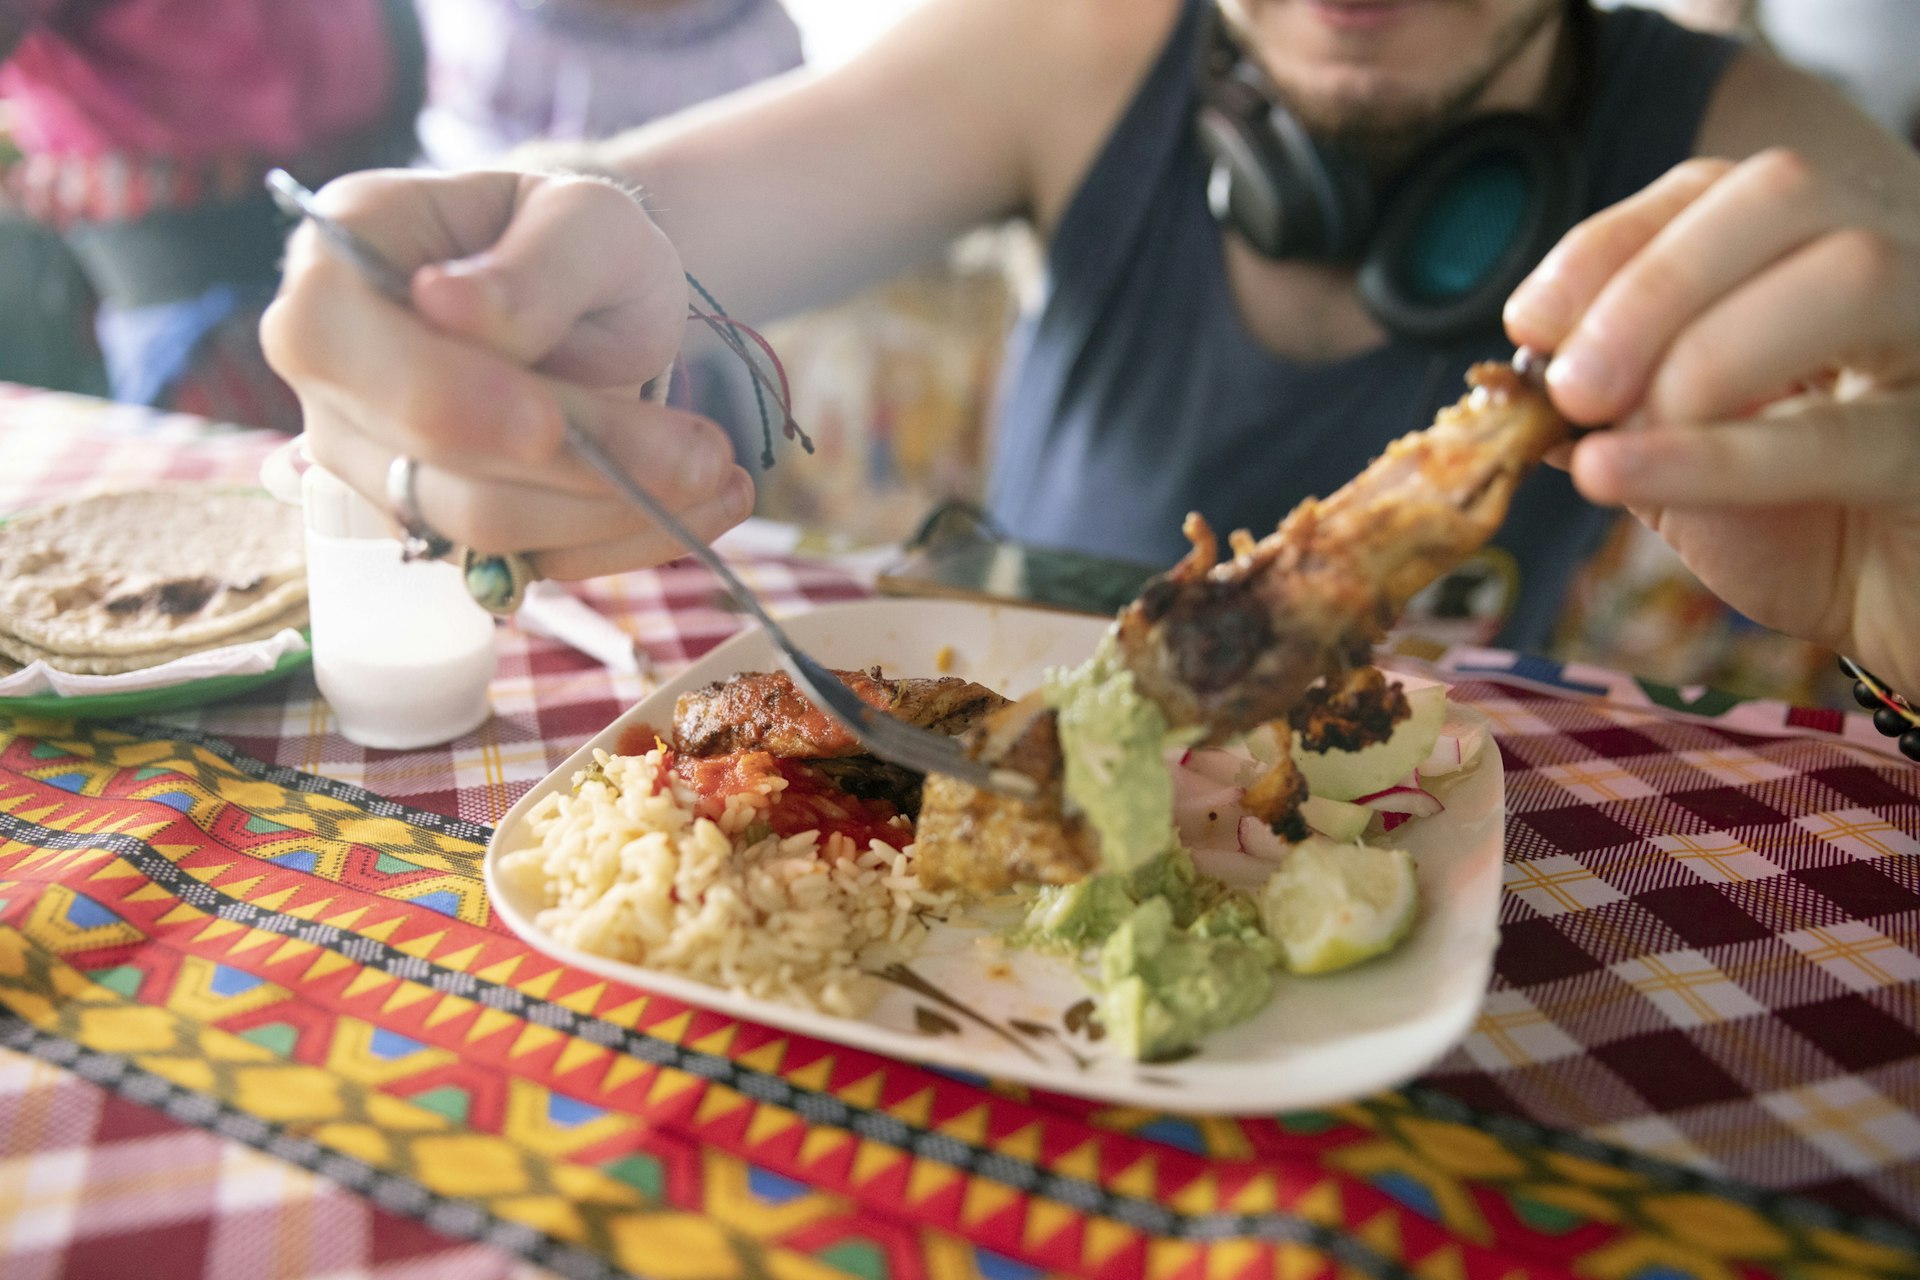 Traveler trying dish of chicken rice and guacamole served at a street food stall in Guatemala